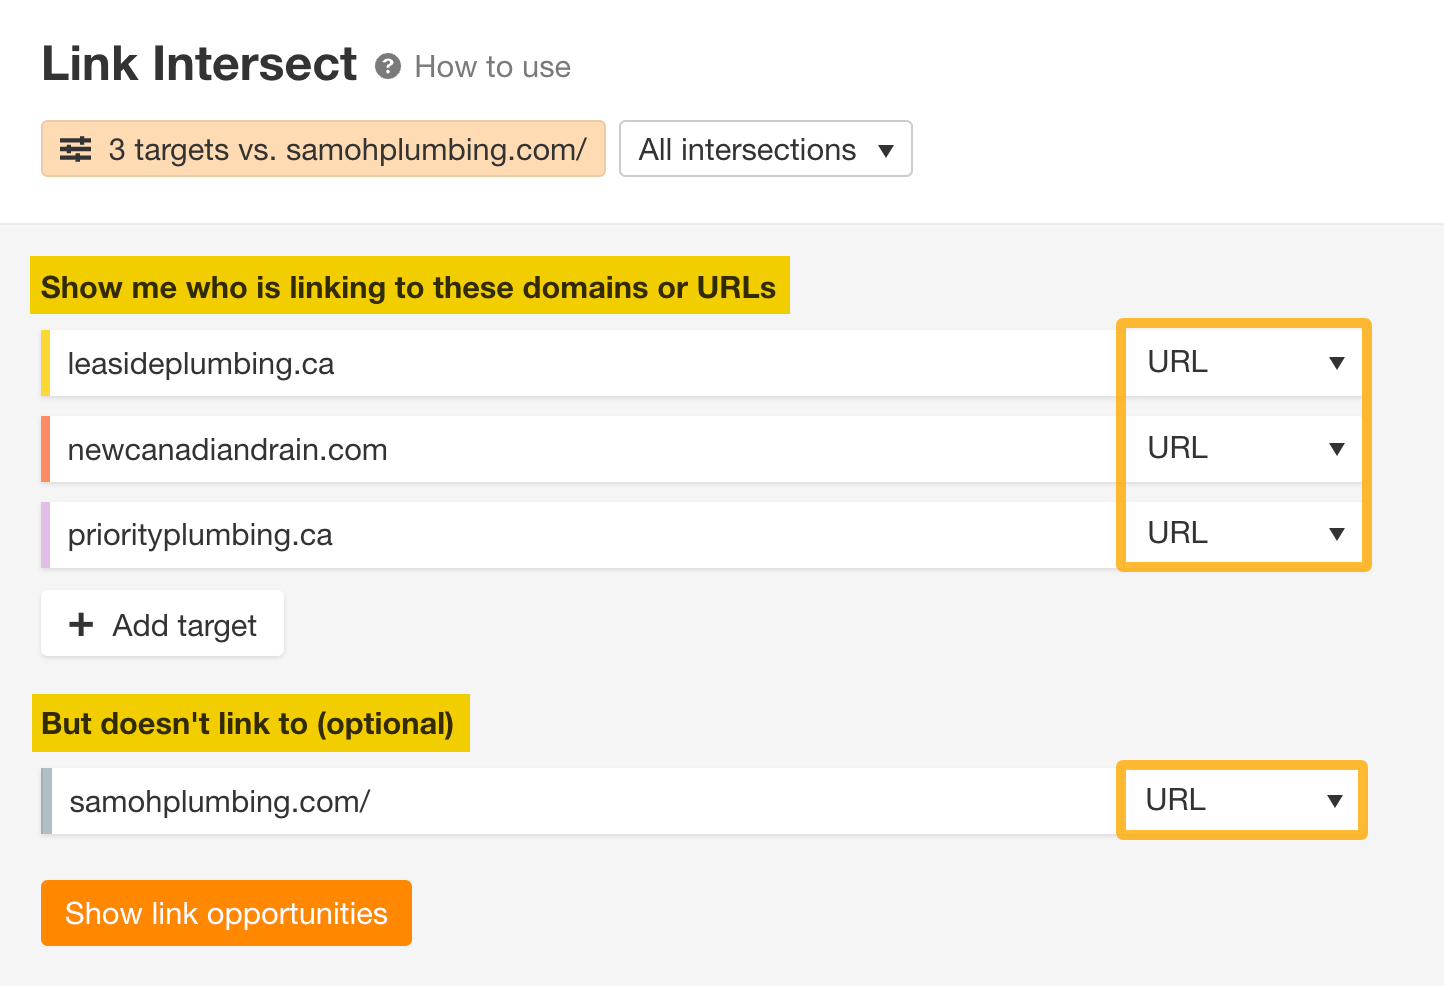 Ahrefs' Link Intersect tool